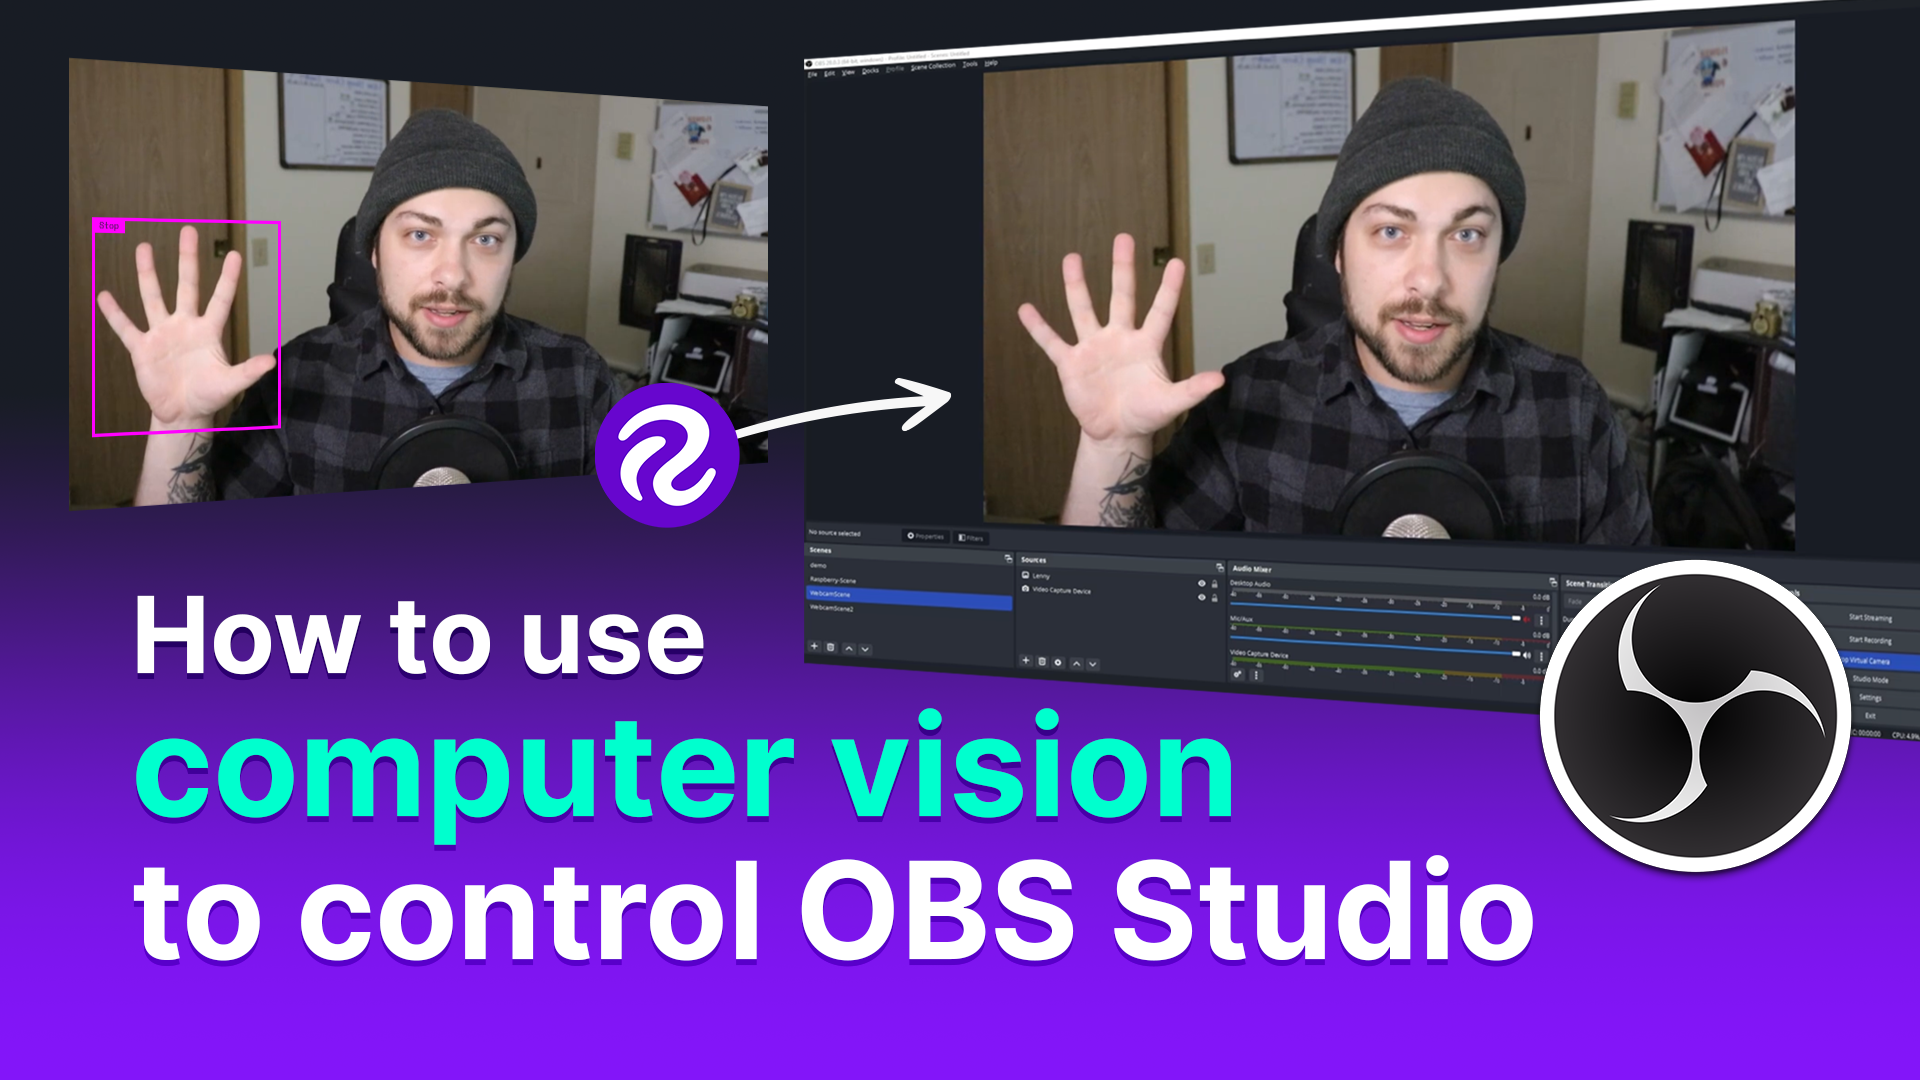 How to Use Computer Vision to Control OBS Studio